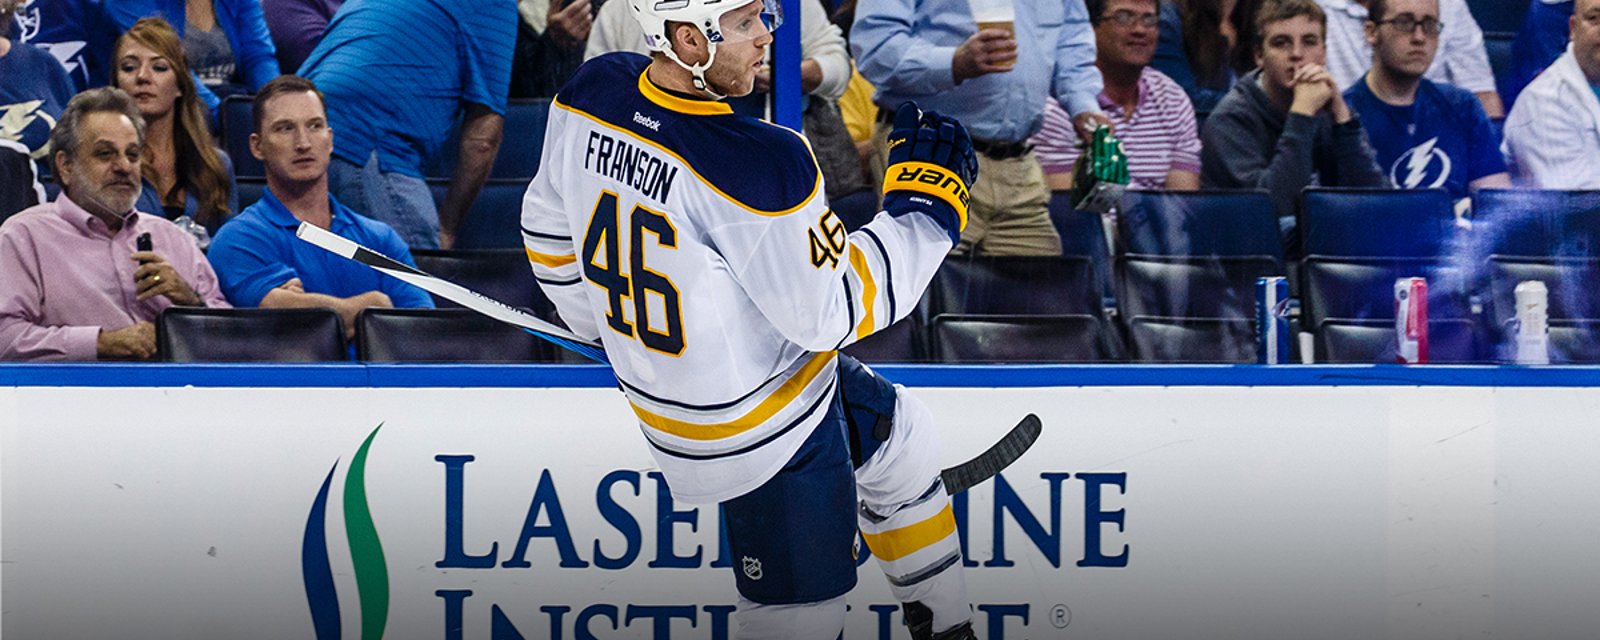 Your Call: Should the Blackhawks sign Cody Franson?